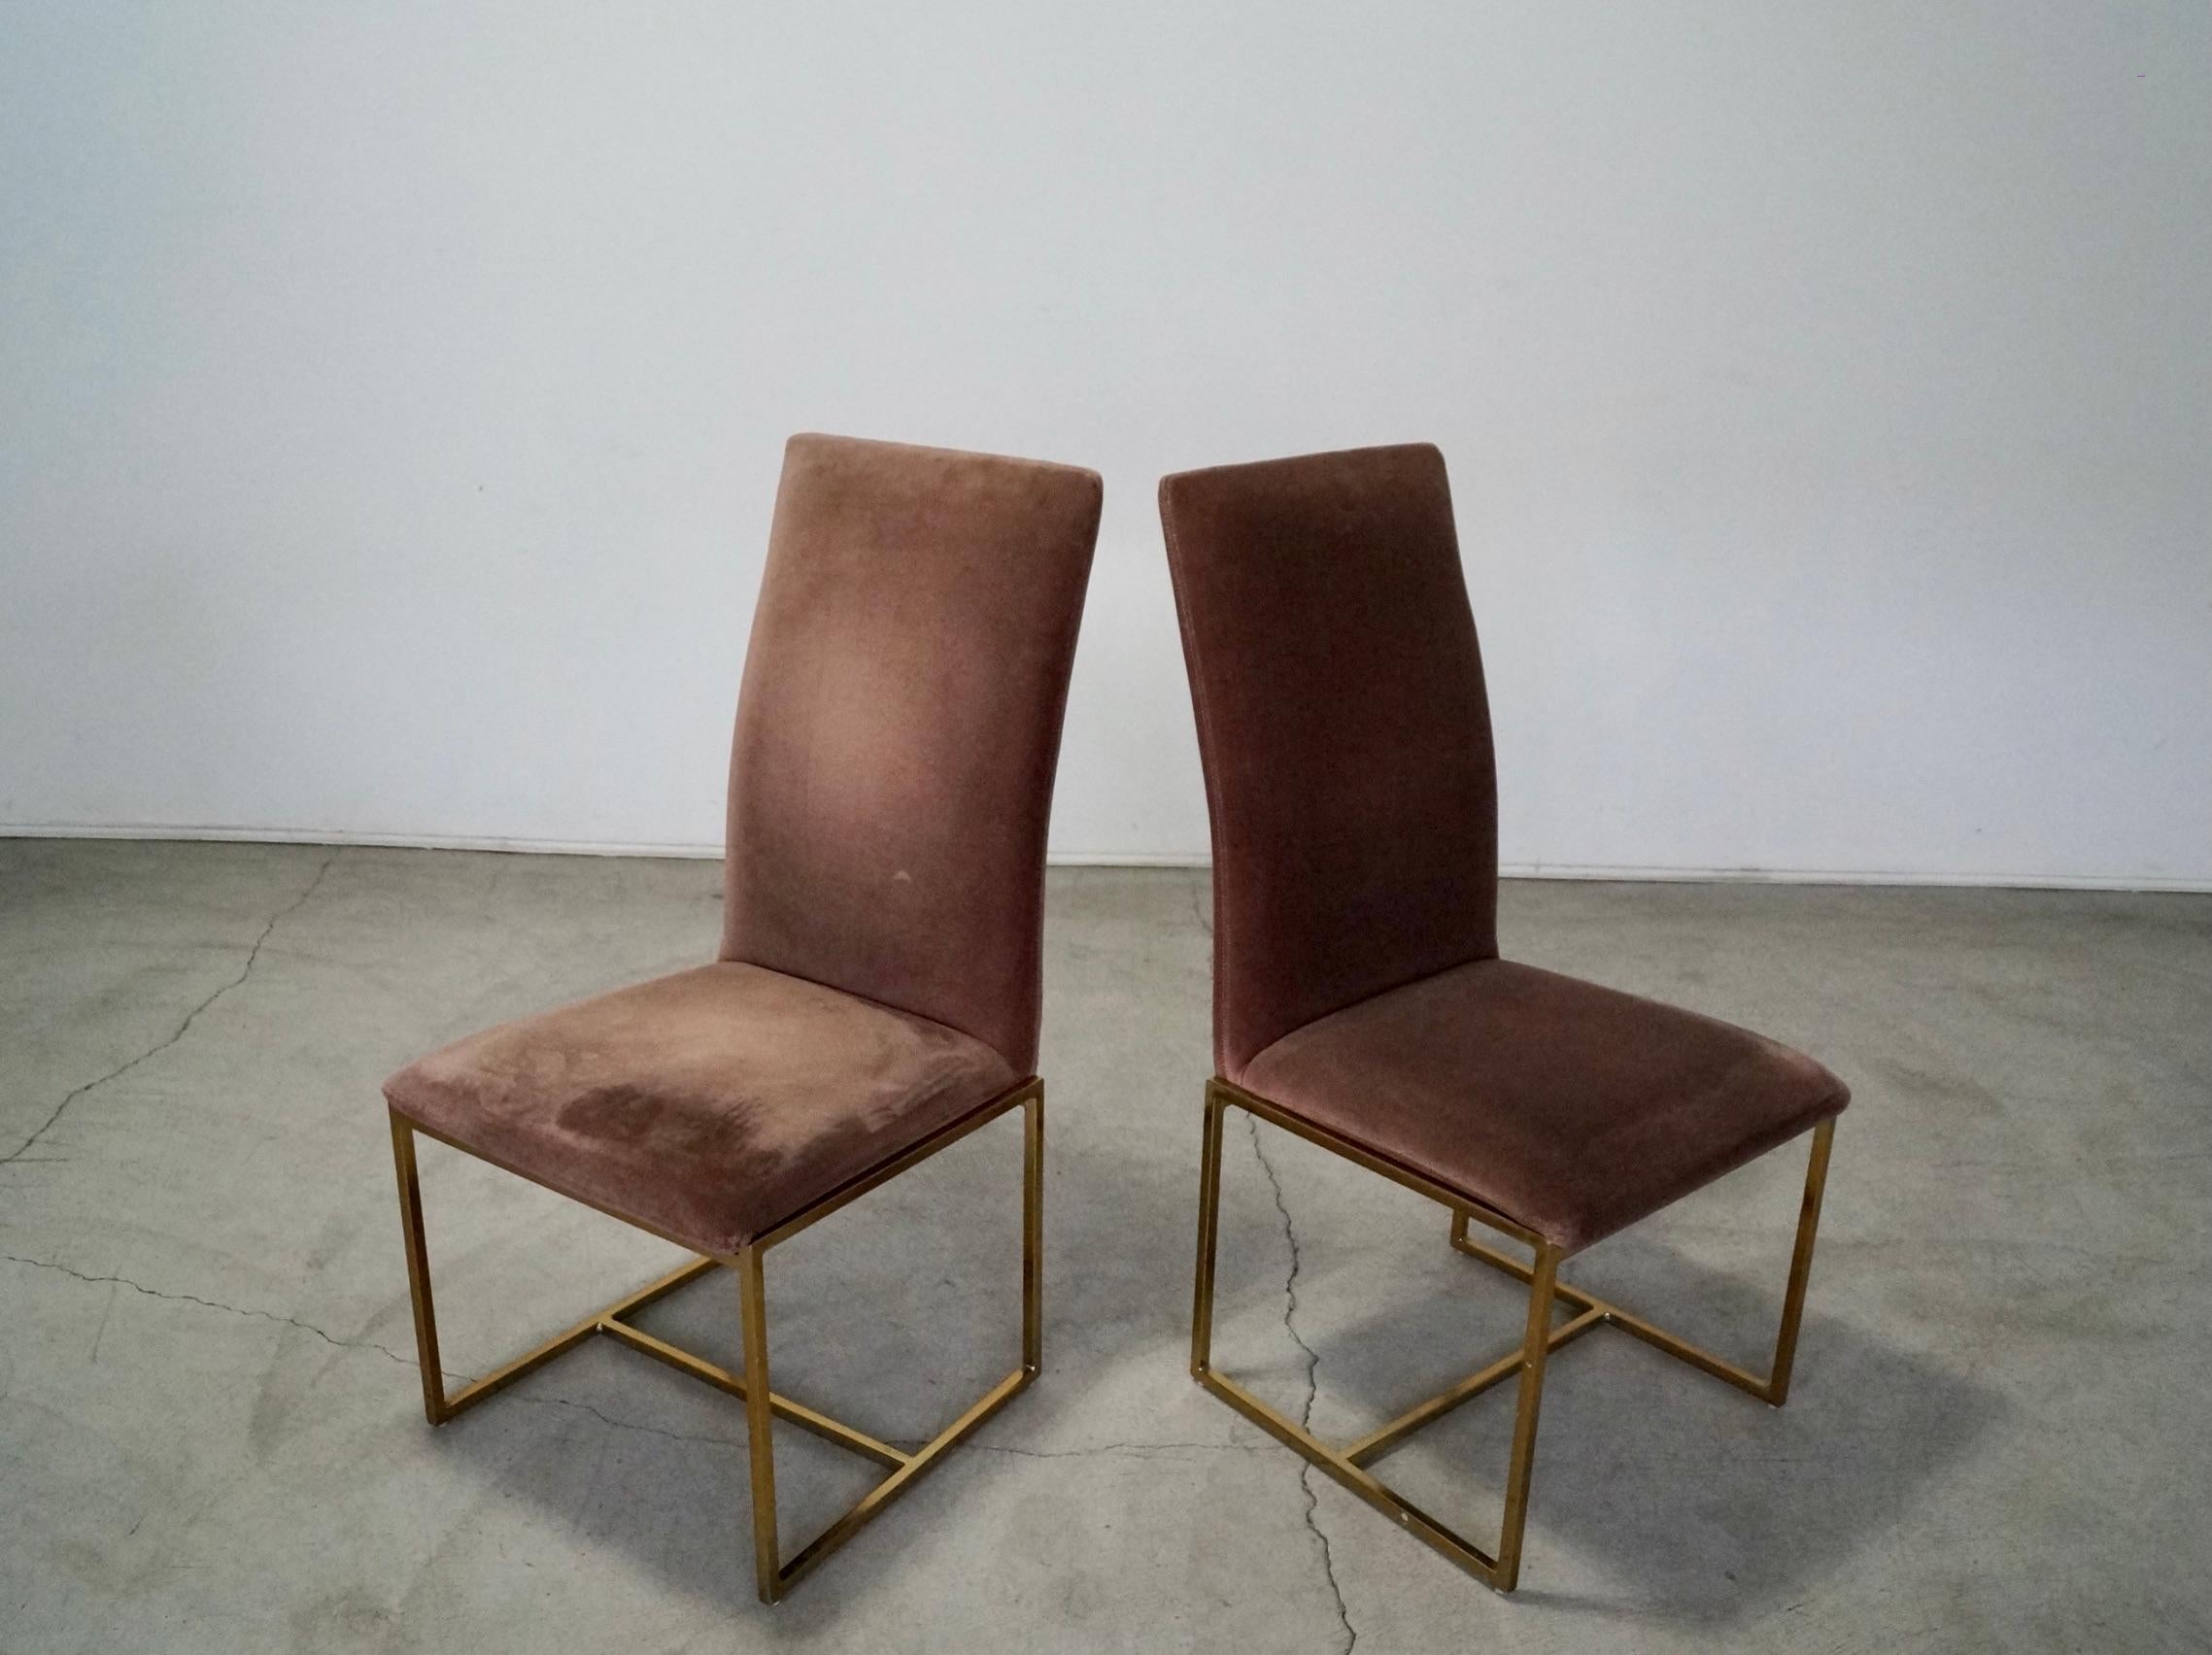 American 1970's Mid-Century Modern Milo Baughman Style Brass Dining Chairs - a Pair For Sale